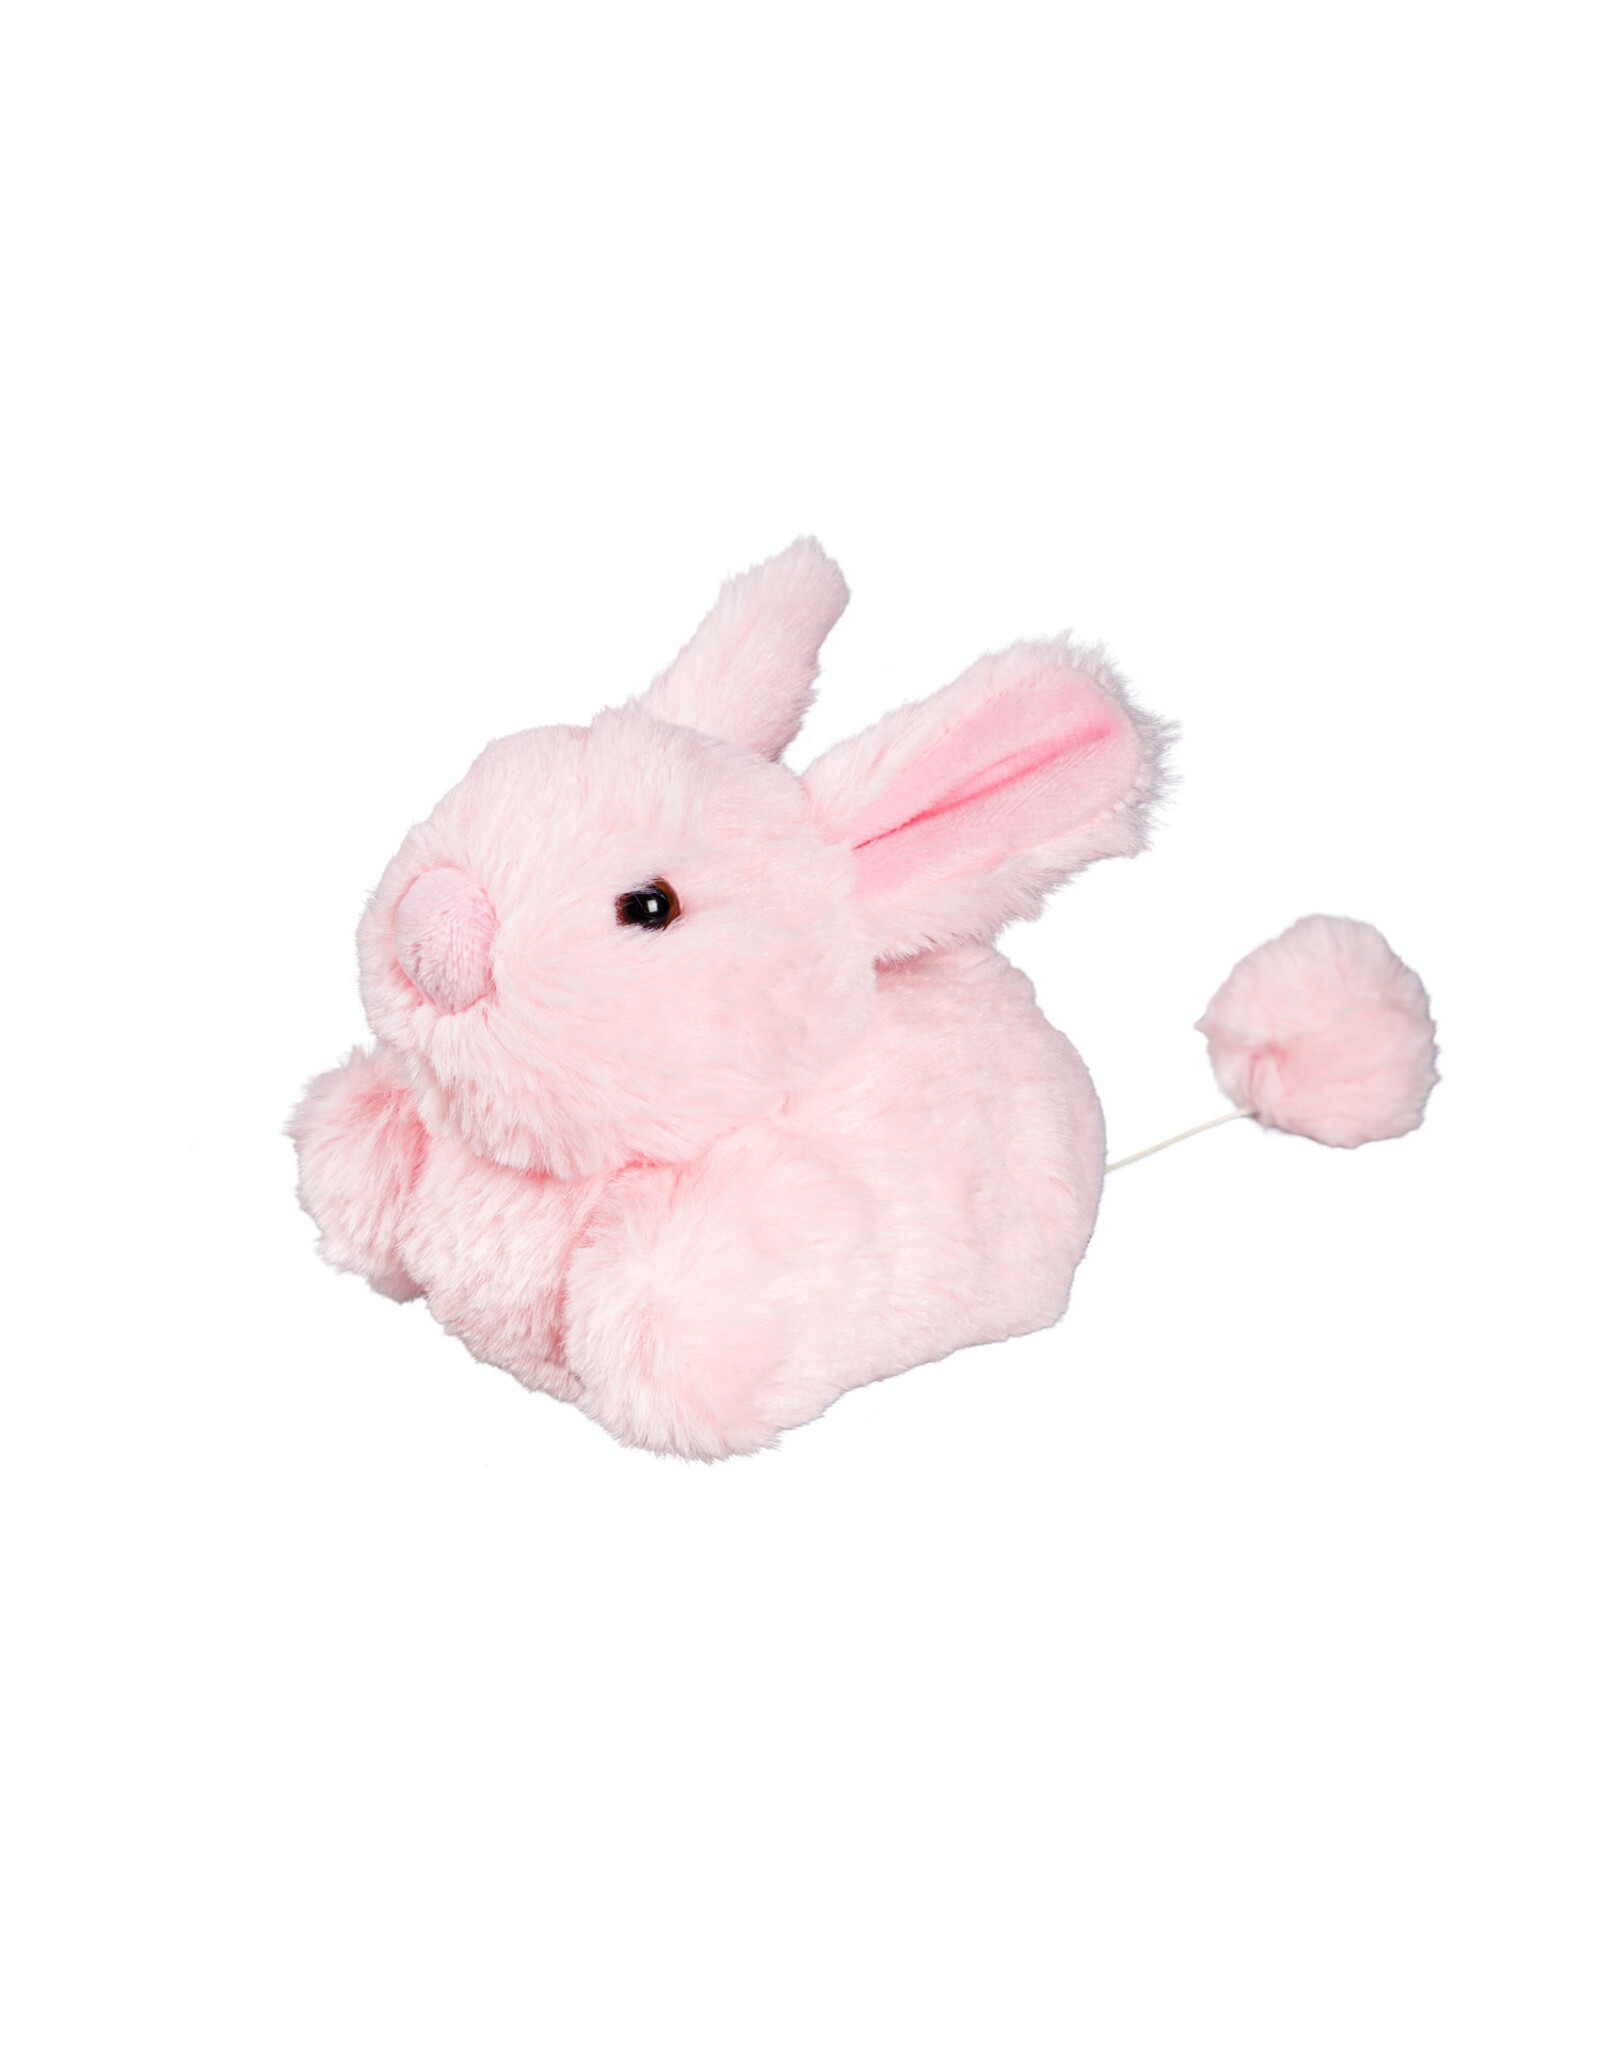 Evergreen Enterprises 5" Plush Pink Bunny with Pull String Movement